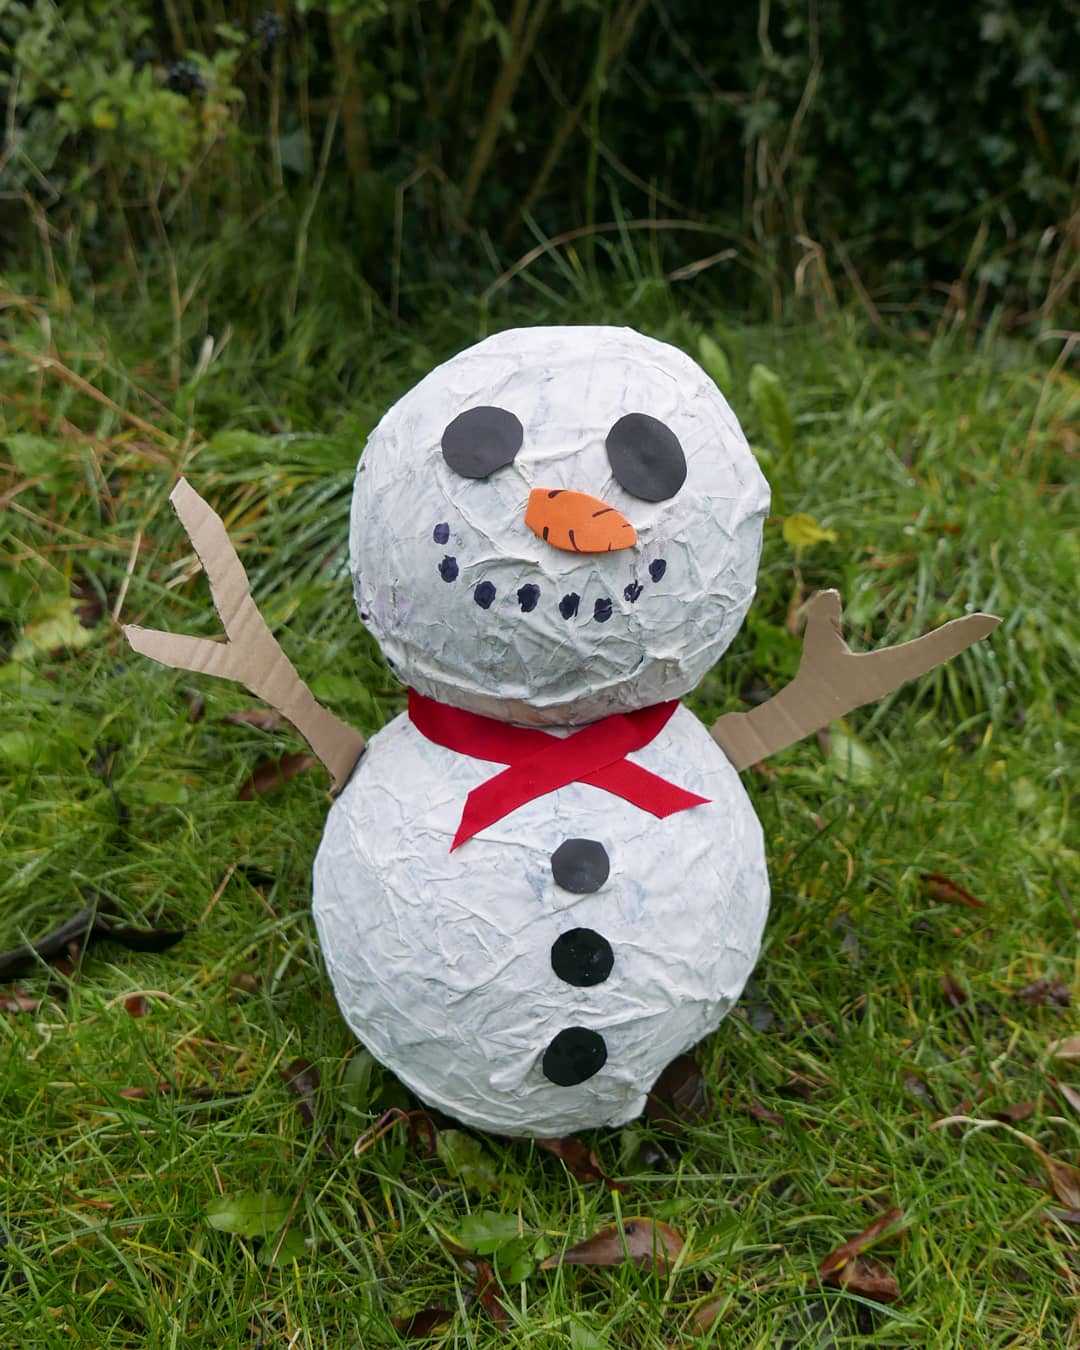 Christmas paper mache craft ideas – Childsplayabc ~ Nature is our playground